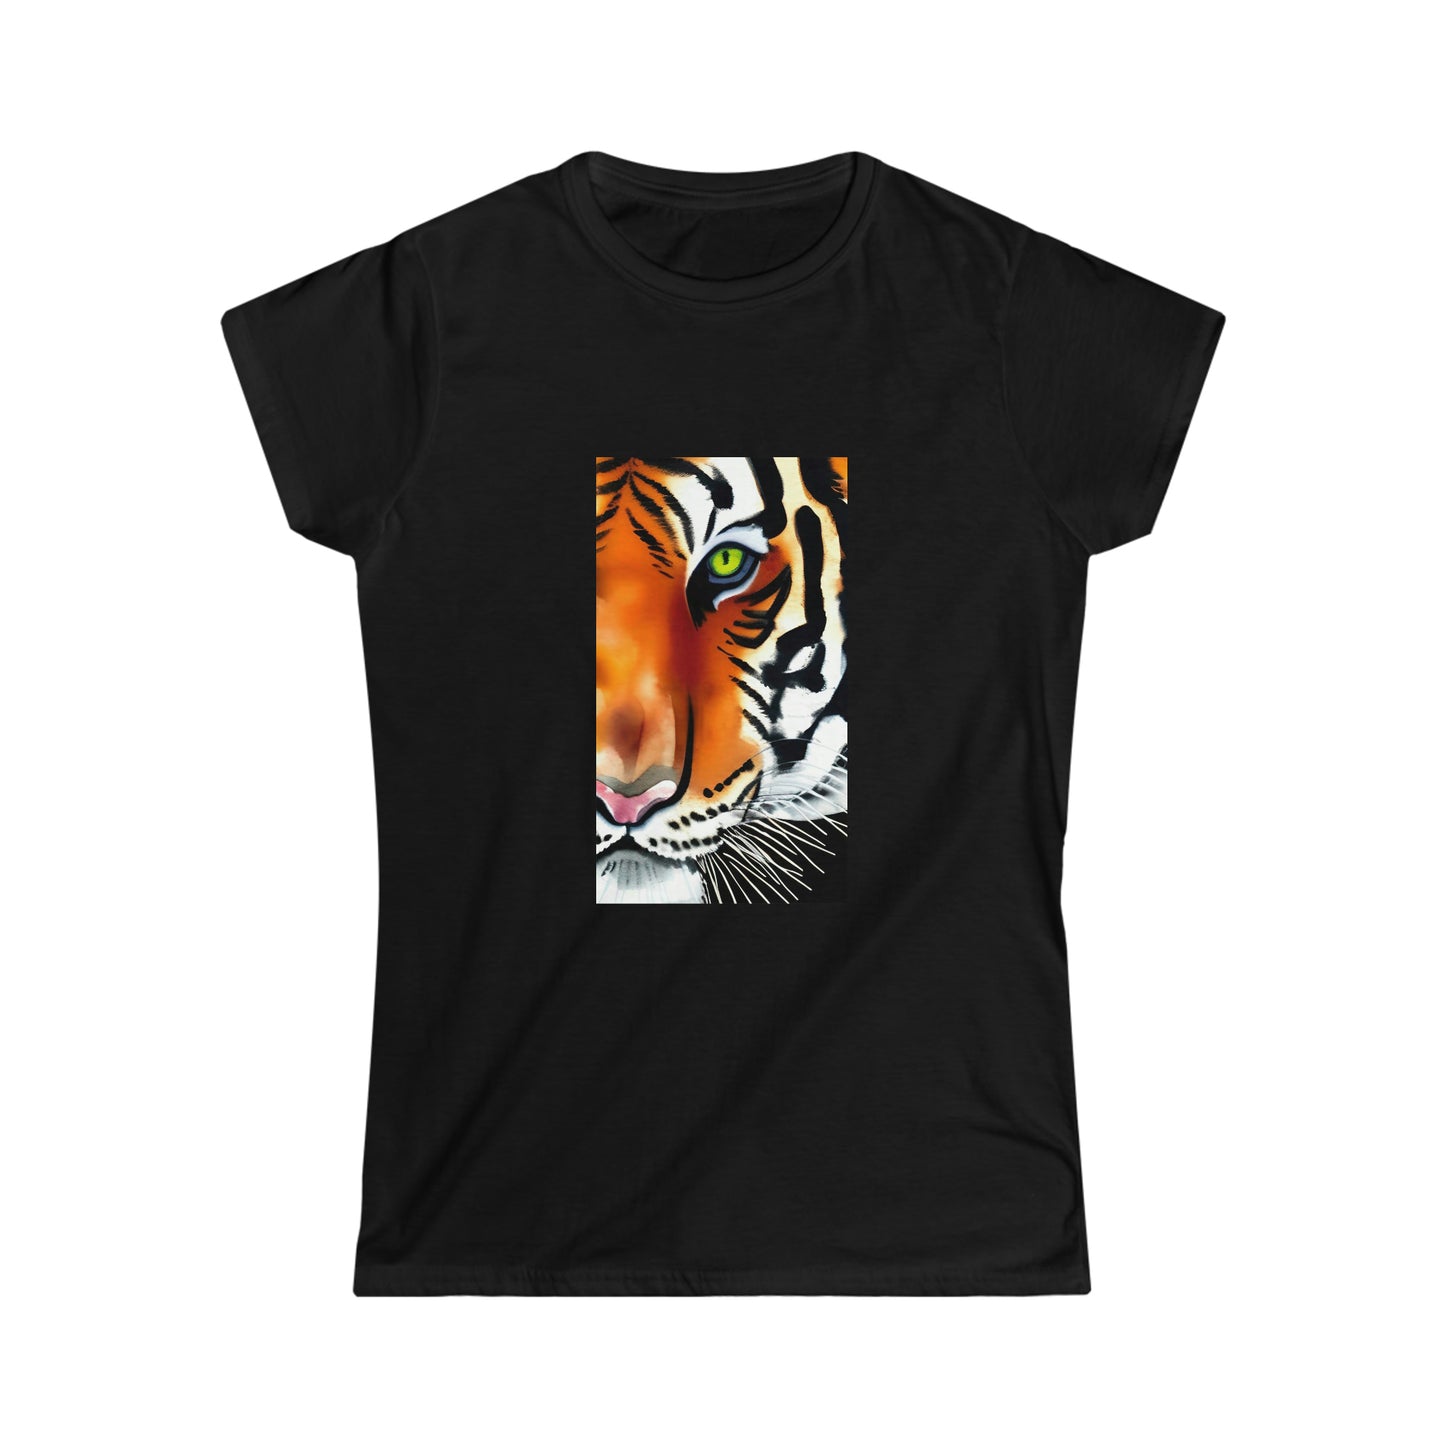 Women's Softstyle Tee - TIGER